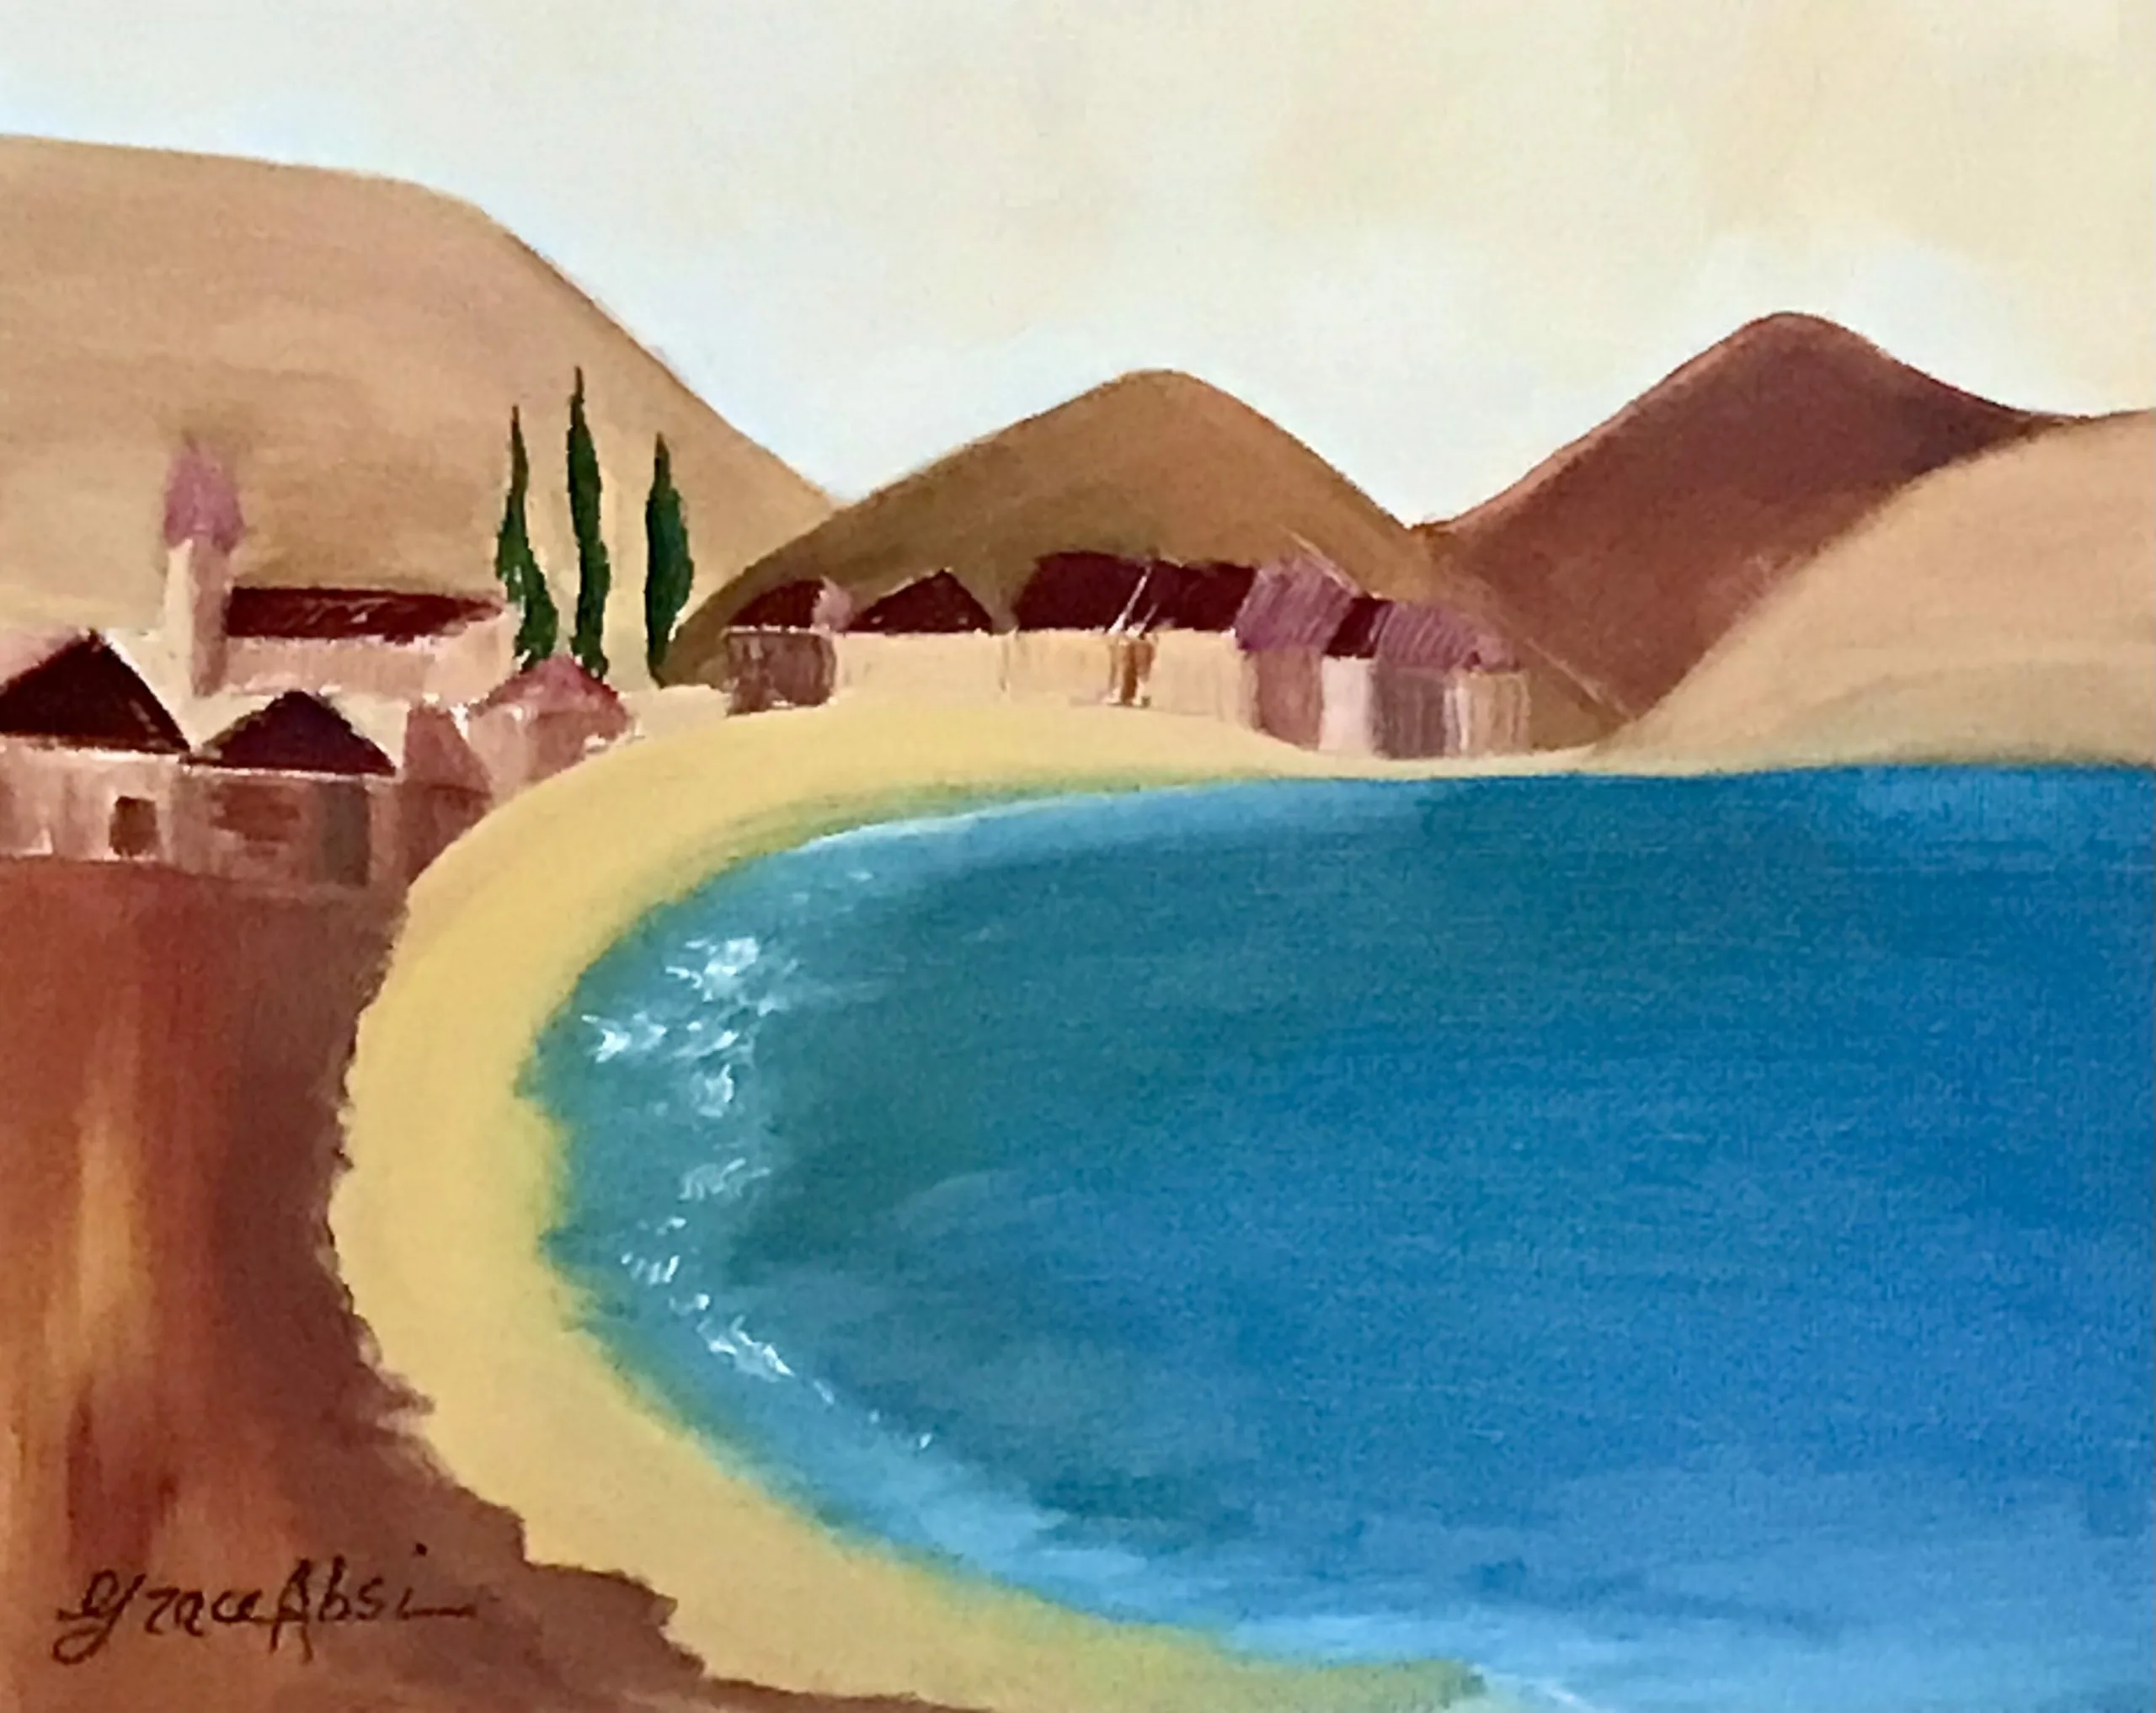 Grace Absi Bay view Oil Painting on Canvas 2003